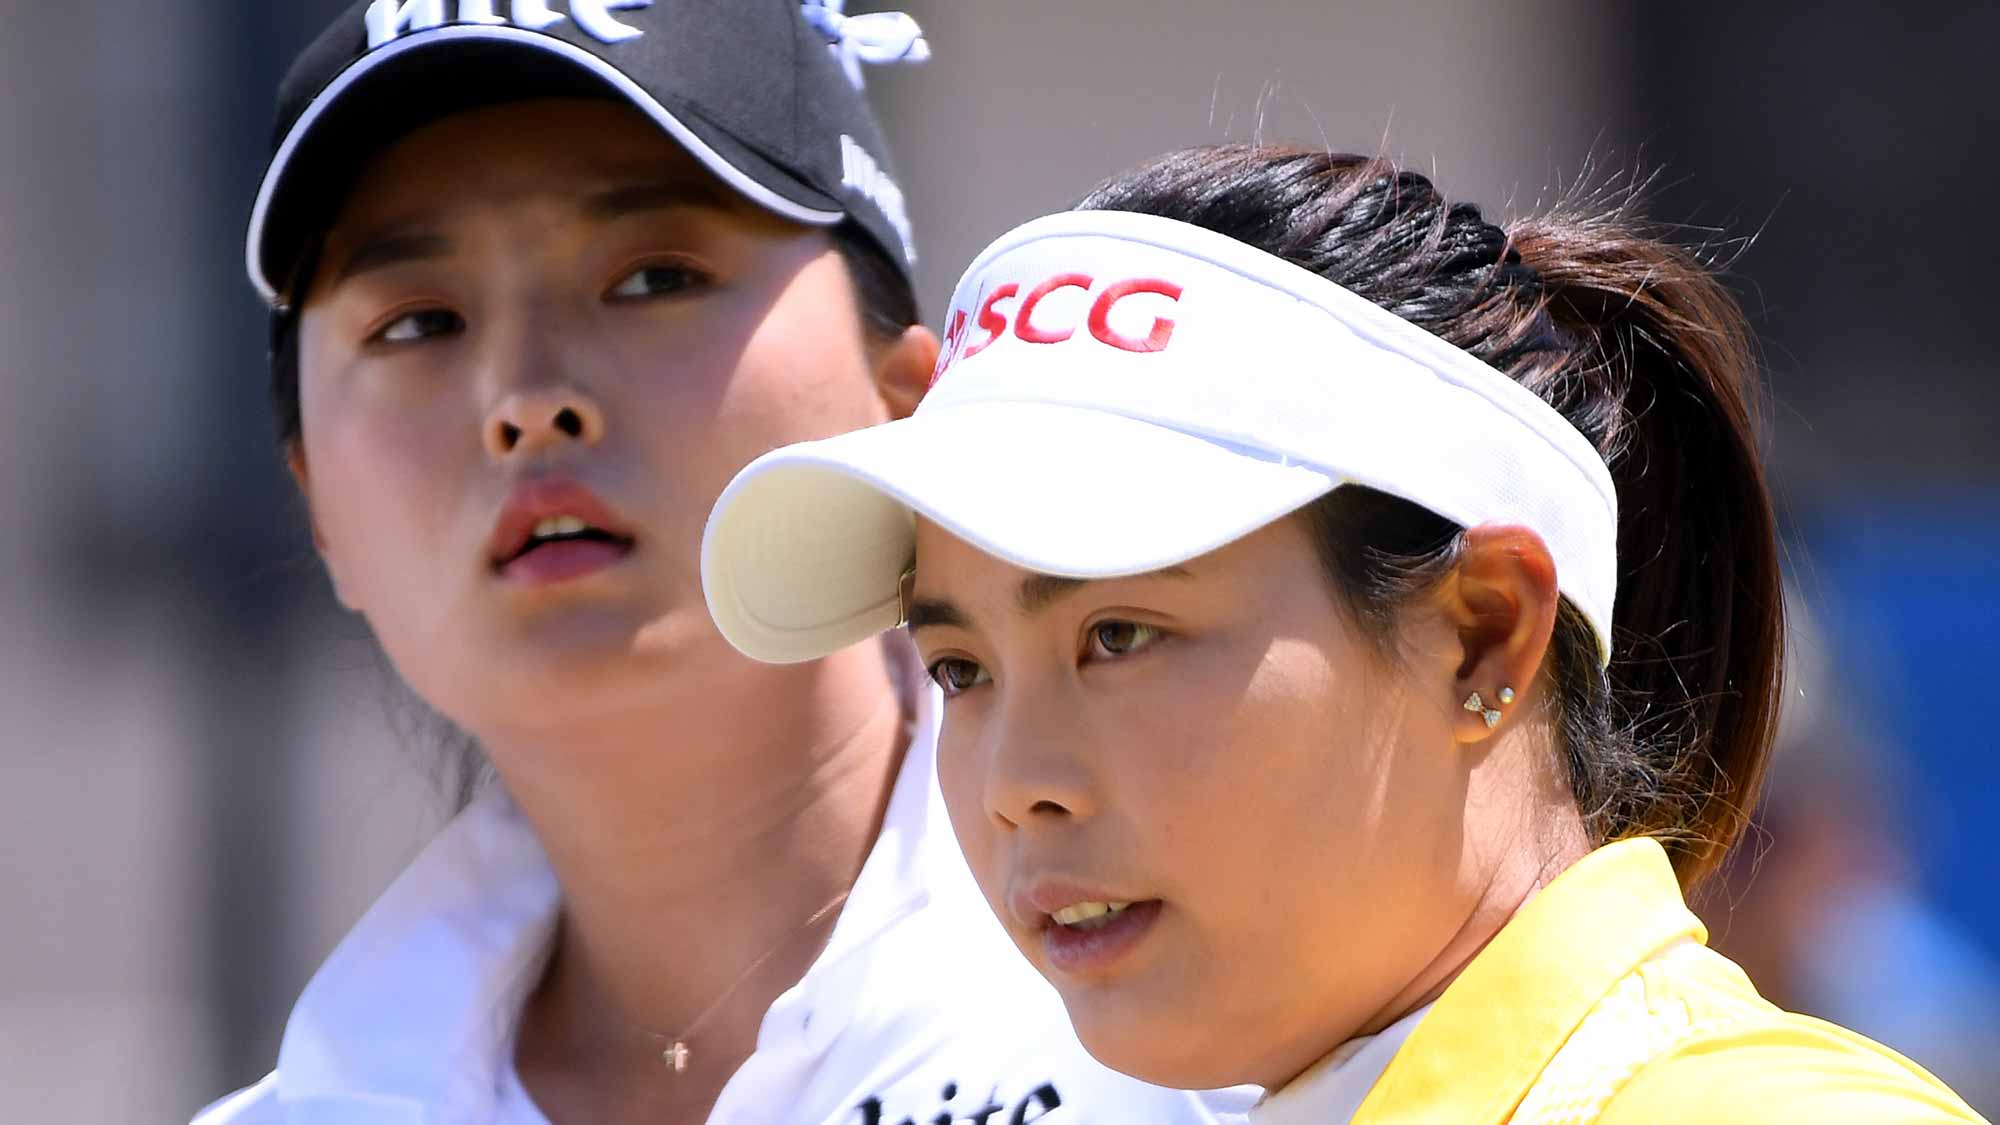 Moriya Jutanugarn of Thailand and Jin Young Ko of South Korea wait to tee off on the first hole during round four of the Hugel-JTBC LA Open at the Wilshire Country Club on April 22, 2018 in Los Angeles, California